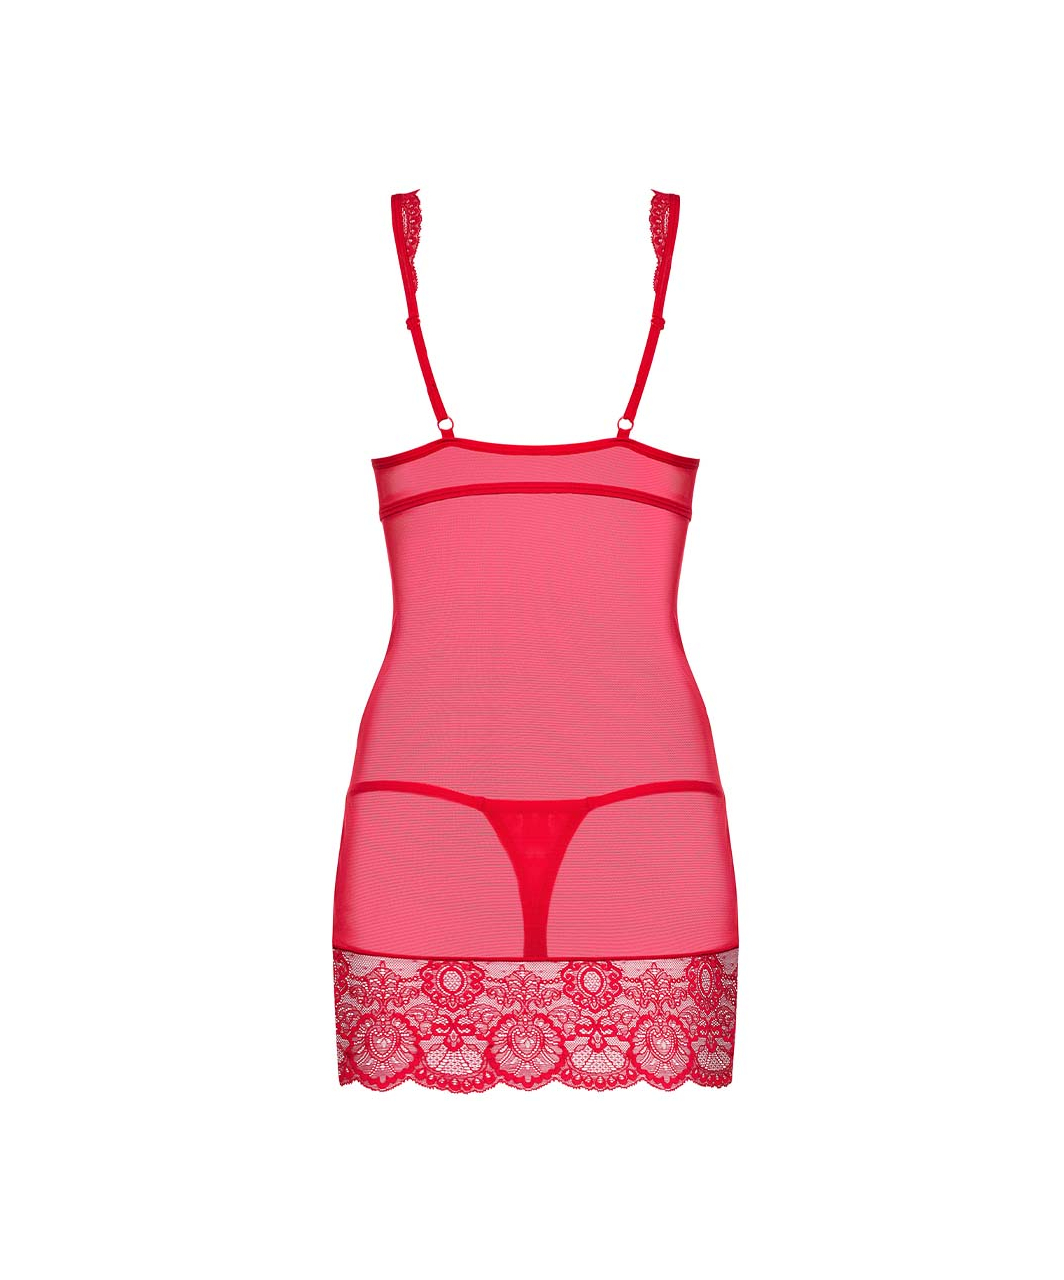 Obsessive Red Mesh Chemise with Lace